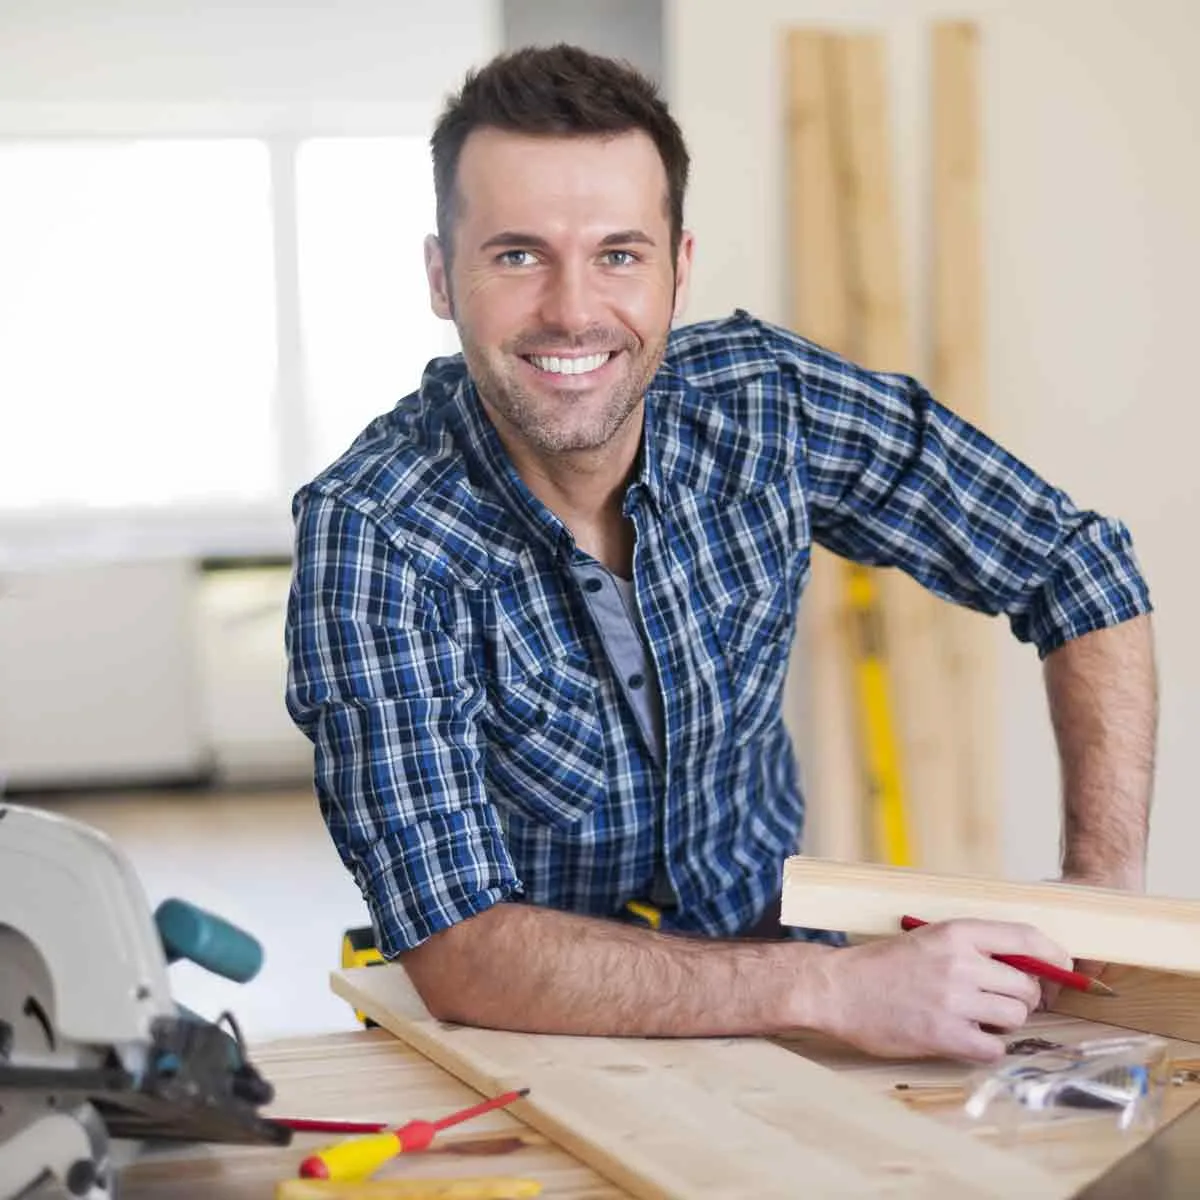 Jason B. is a home remodeling contractor